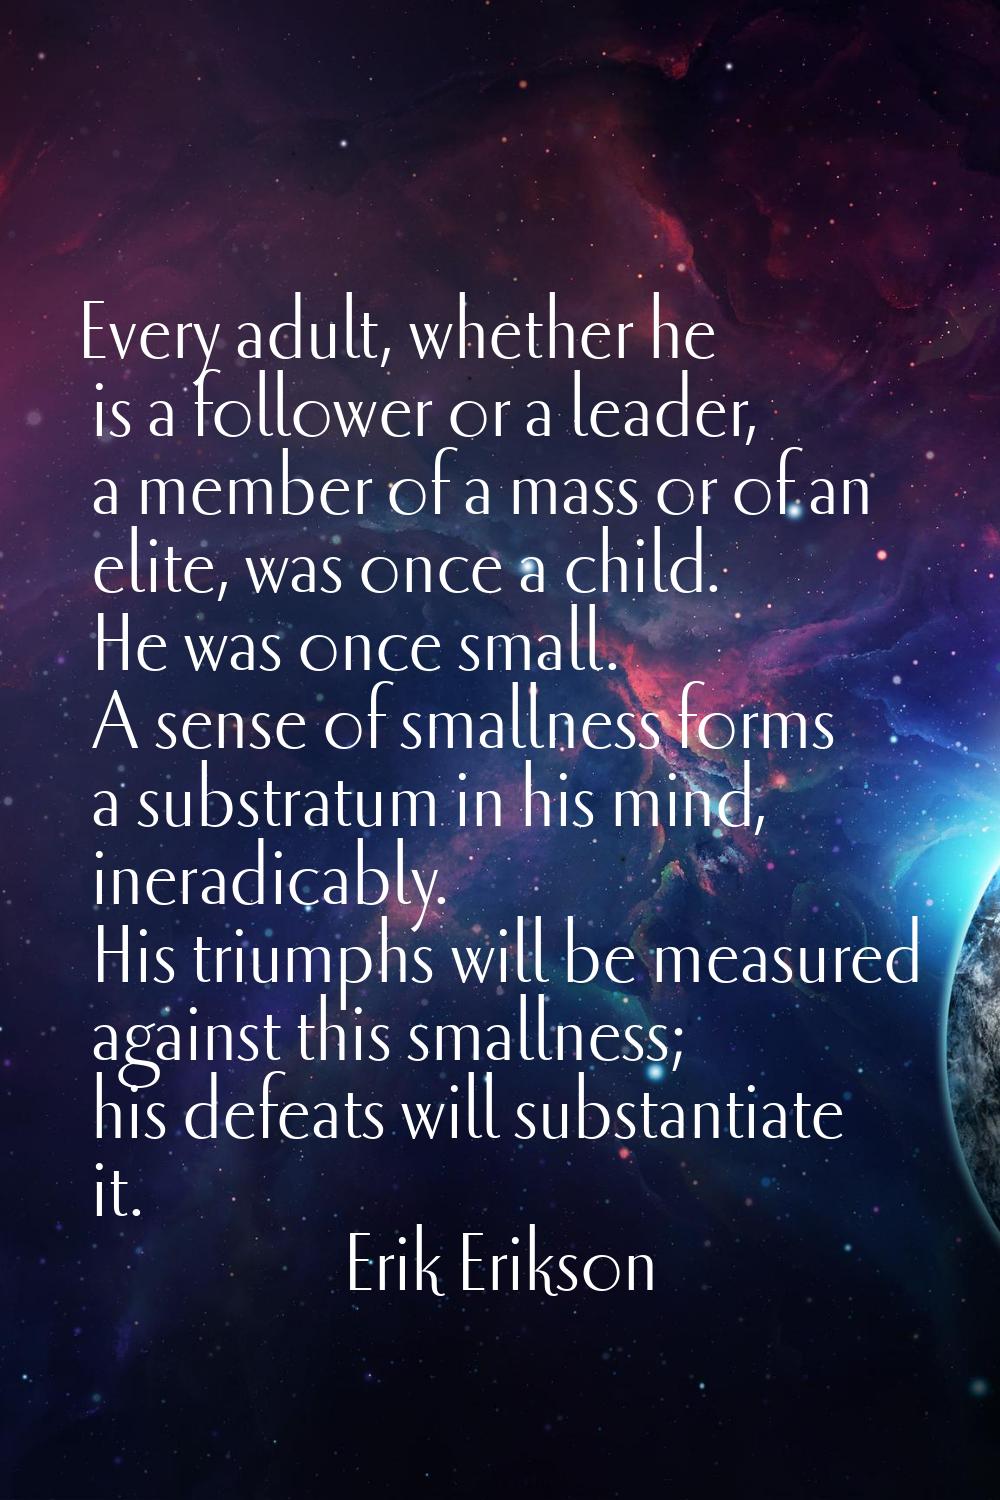 Every adult, whether he is a follower or a leader, a member of a mass or of an elite, was once a ch